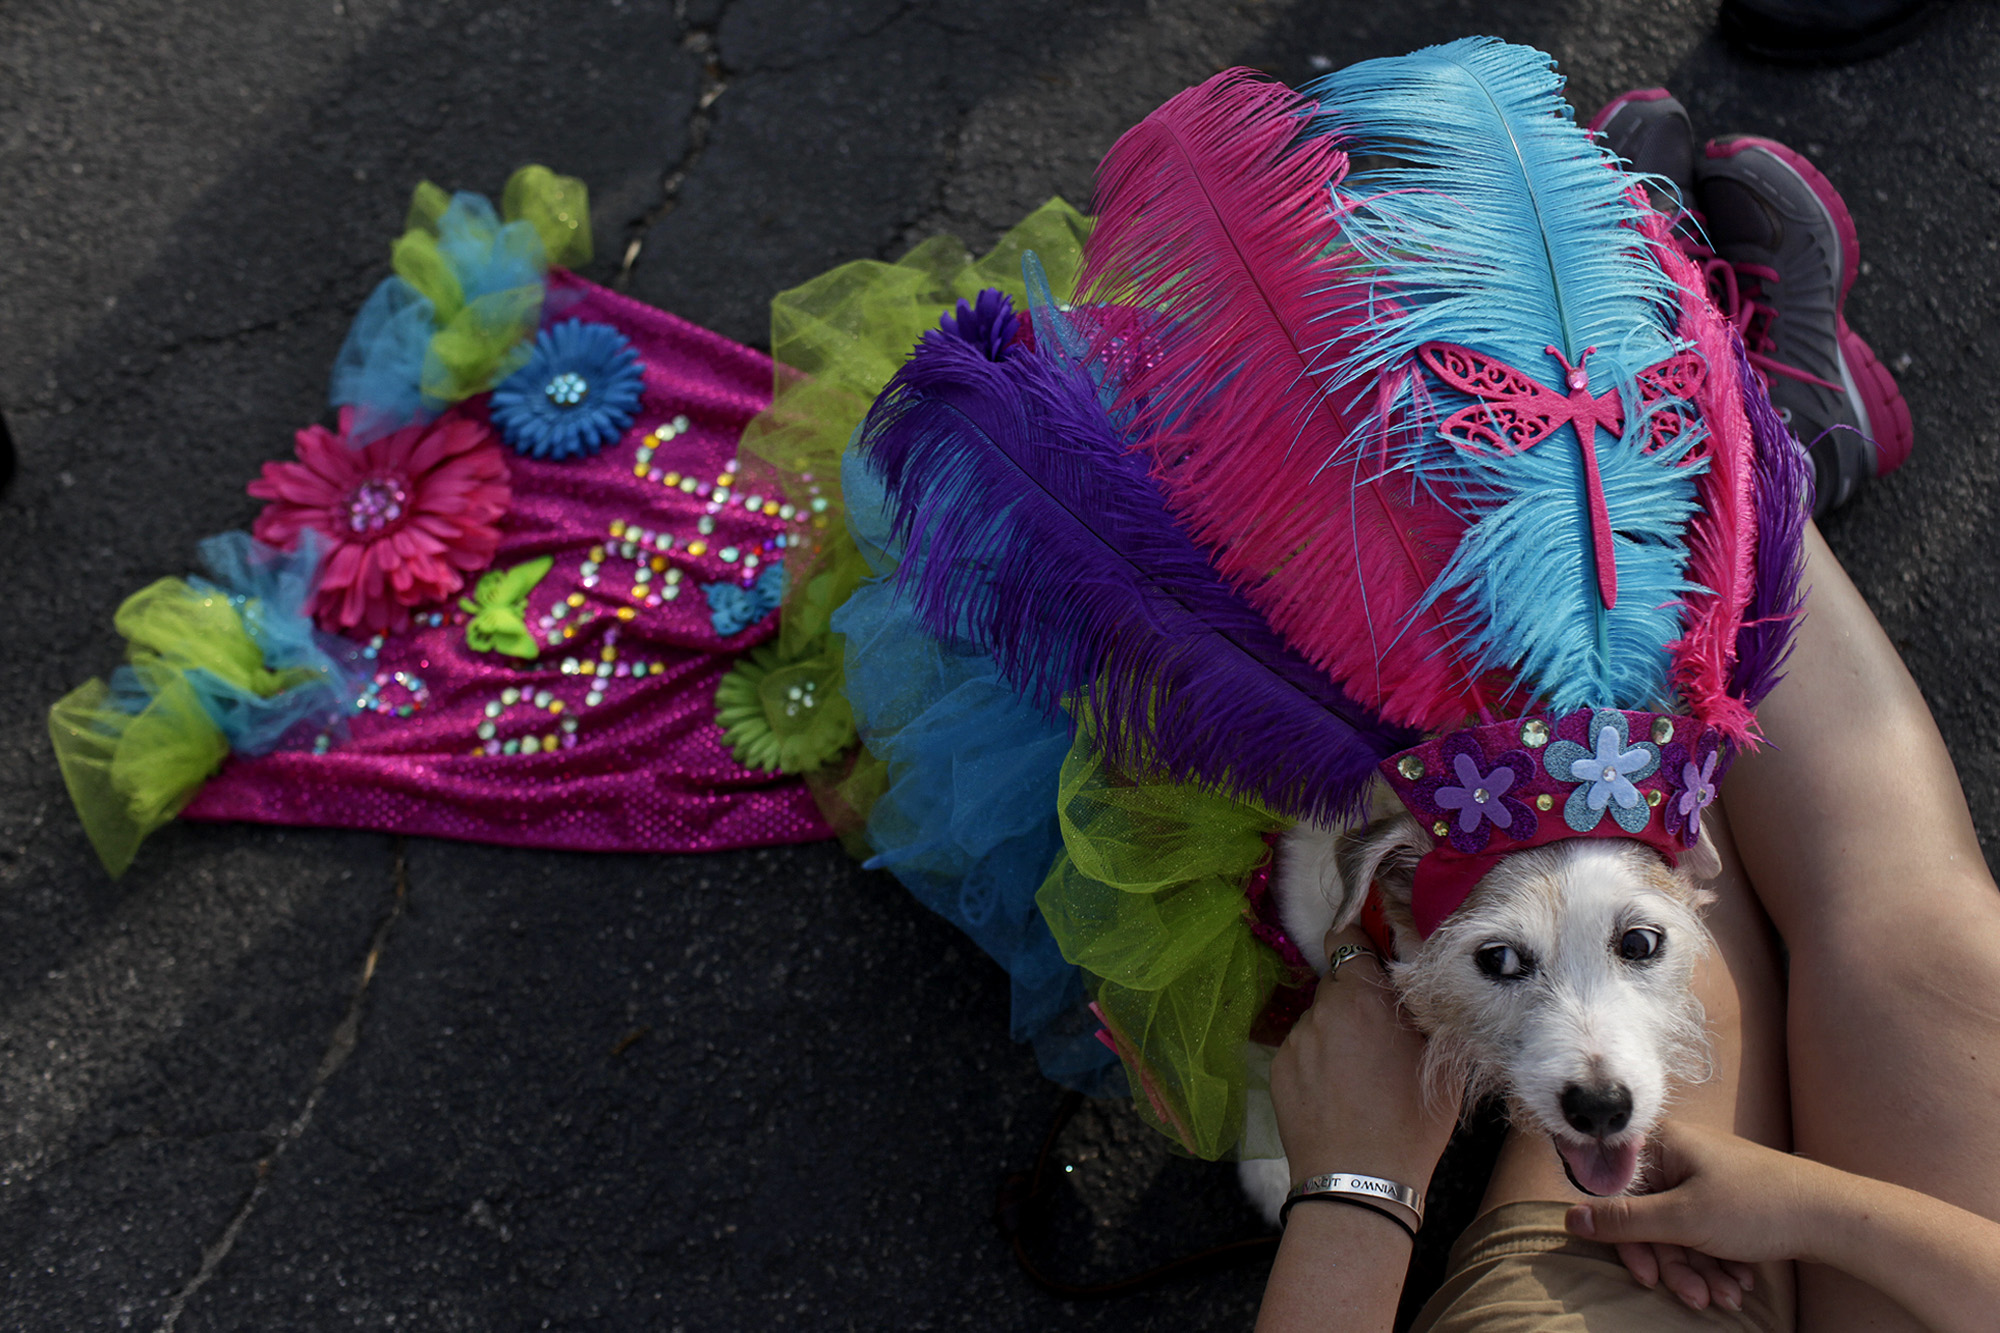 Pooch Parade, King William Fair draw enthusiastic crowds